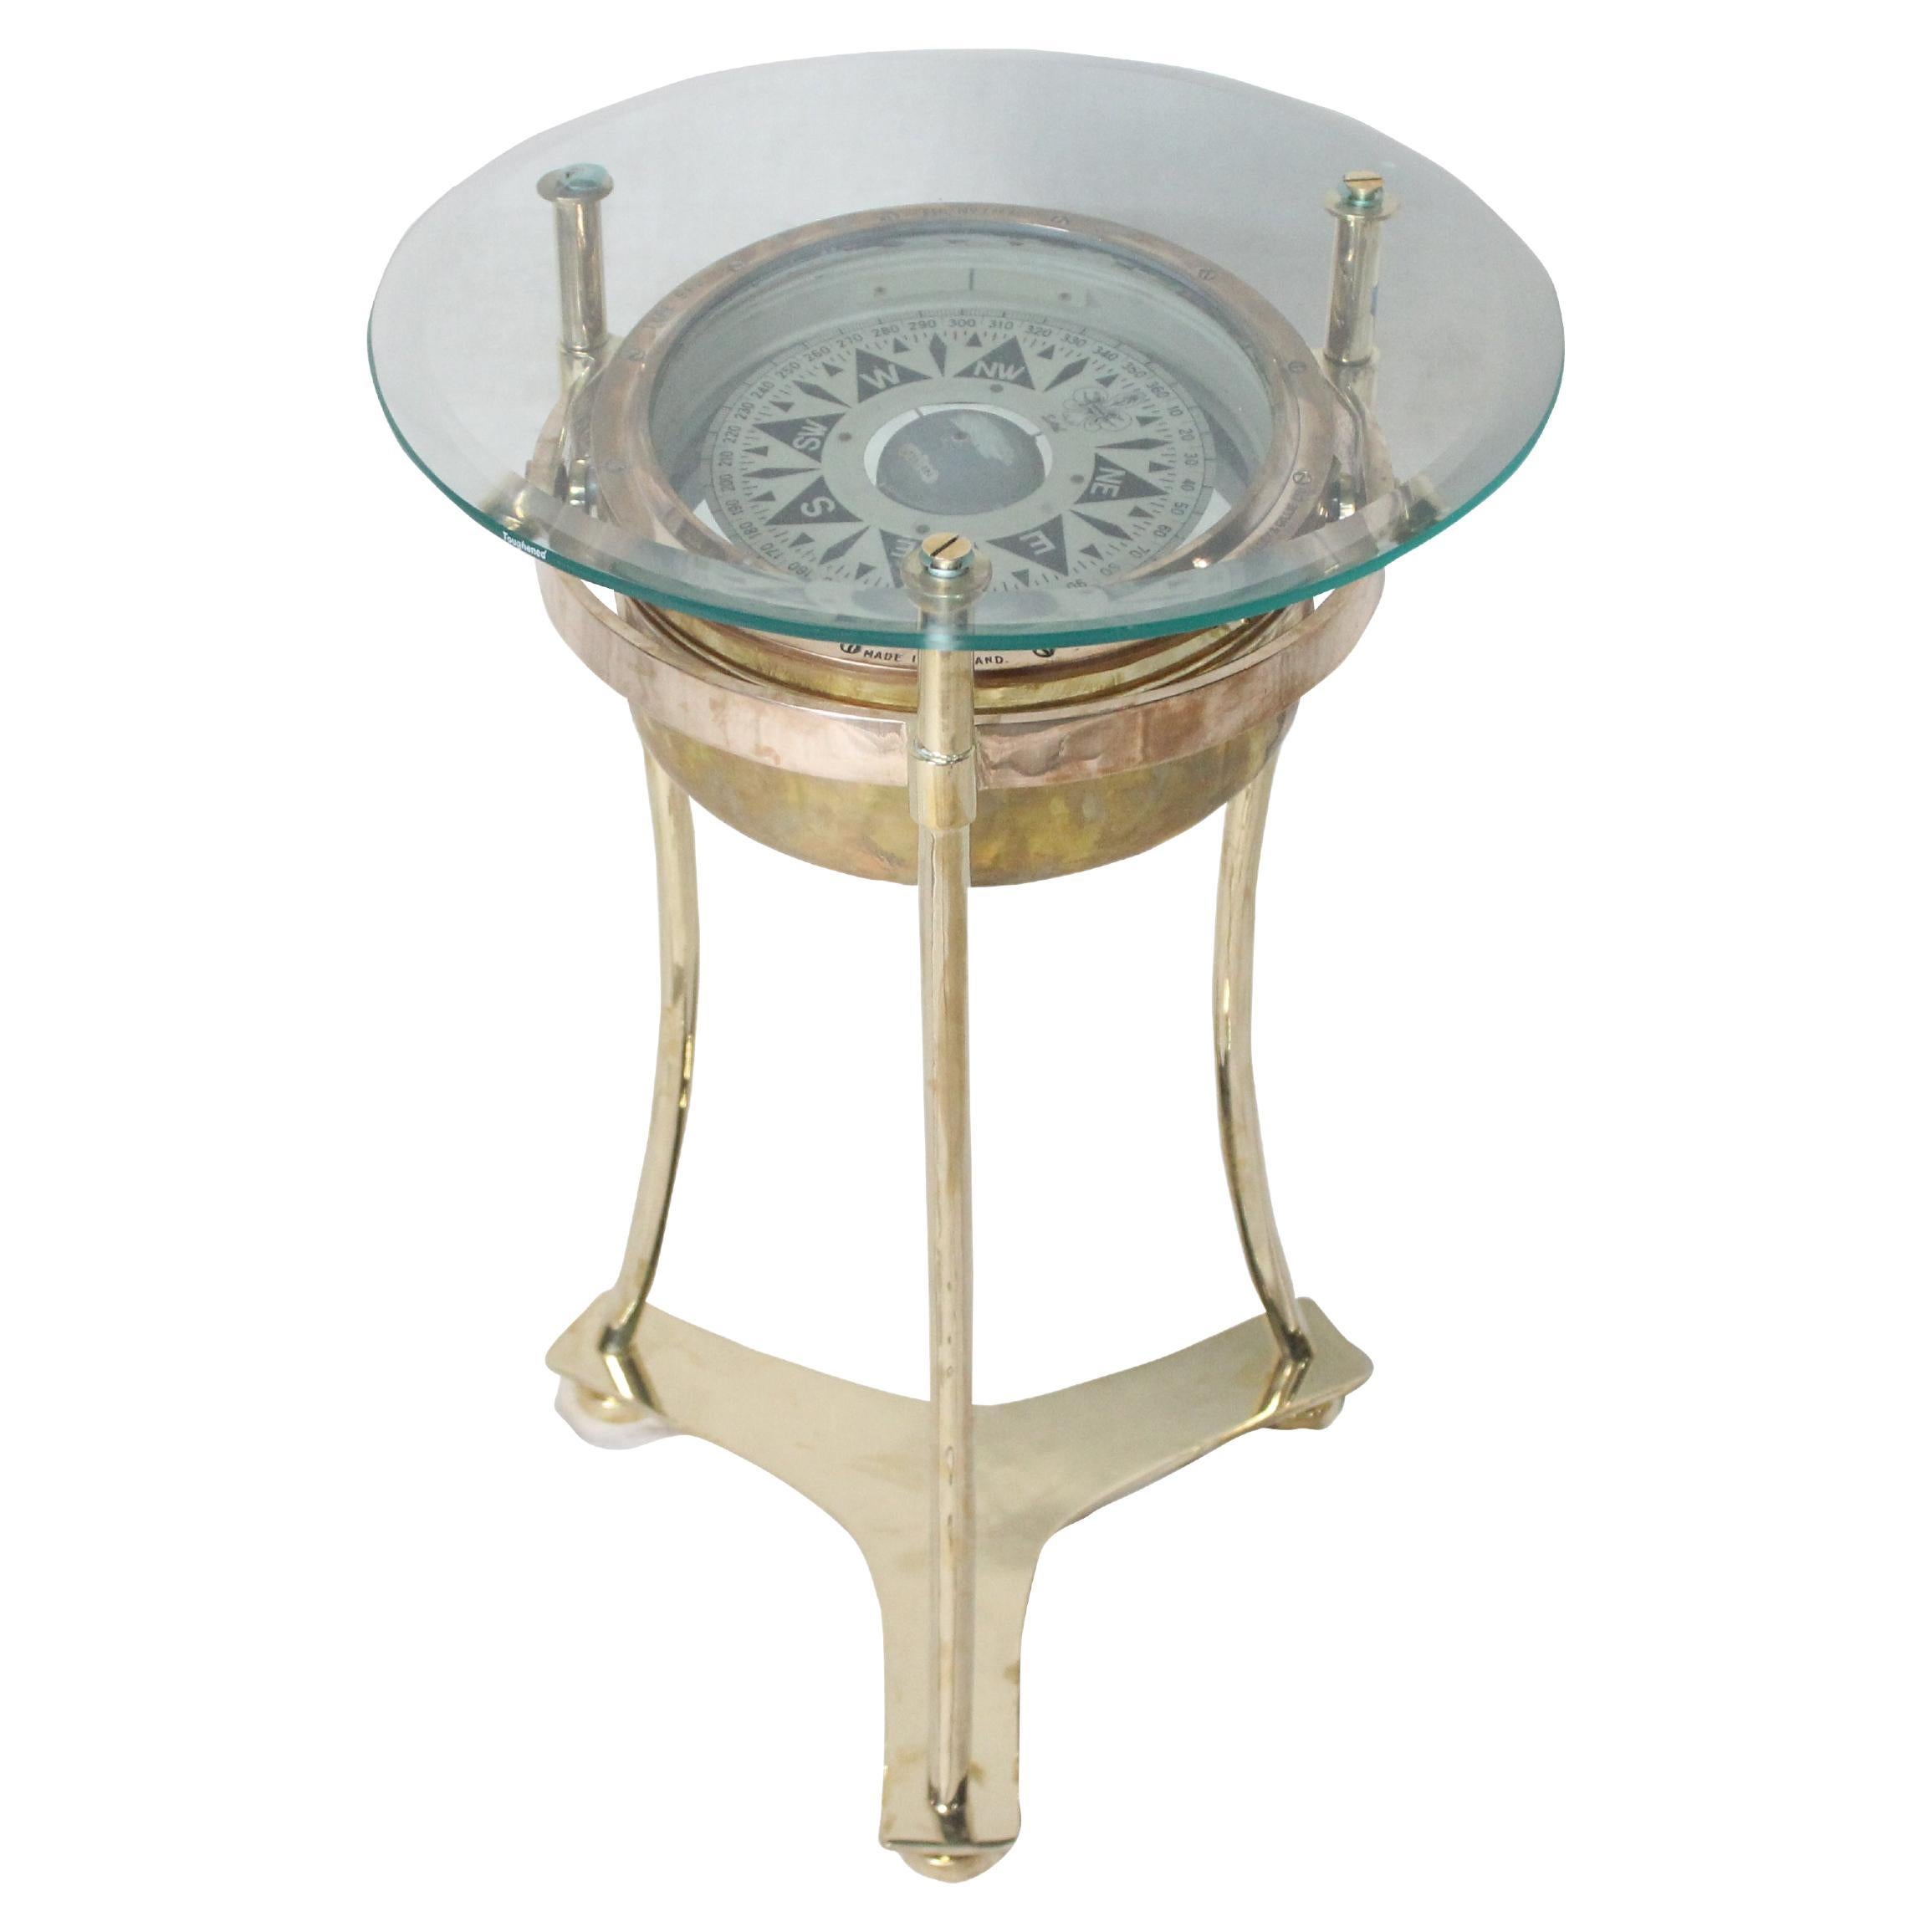 Brass Ship's Cassens & Plath Compass, Converted to Side Table, English, 1970s